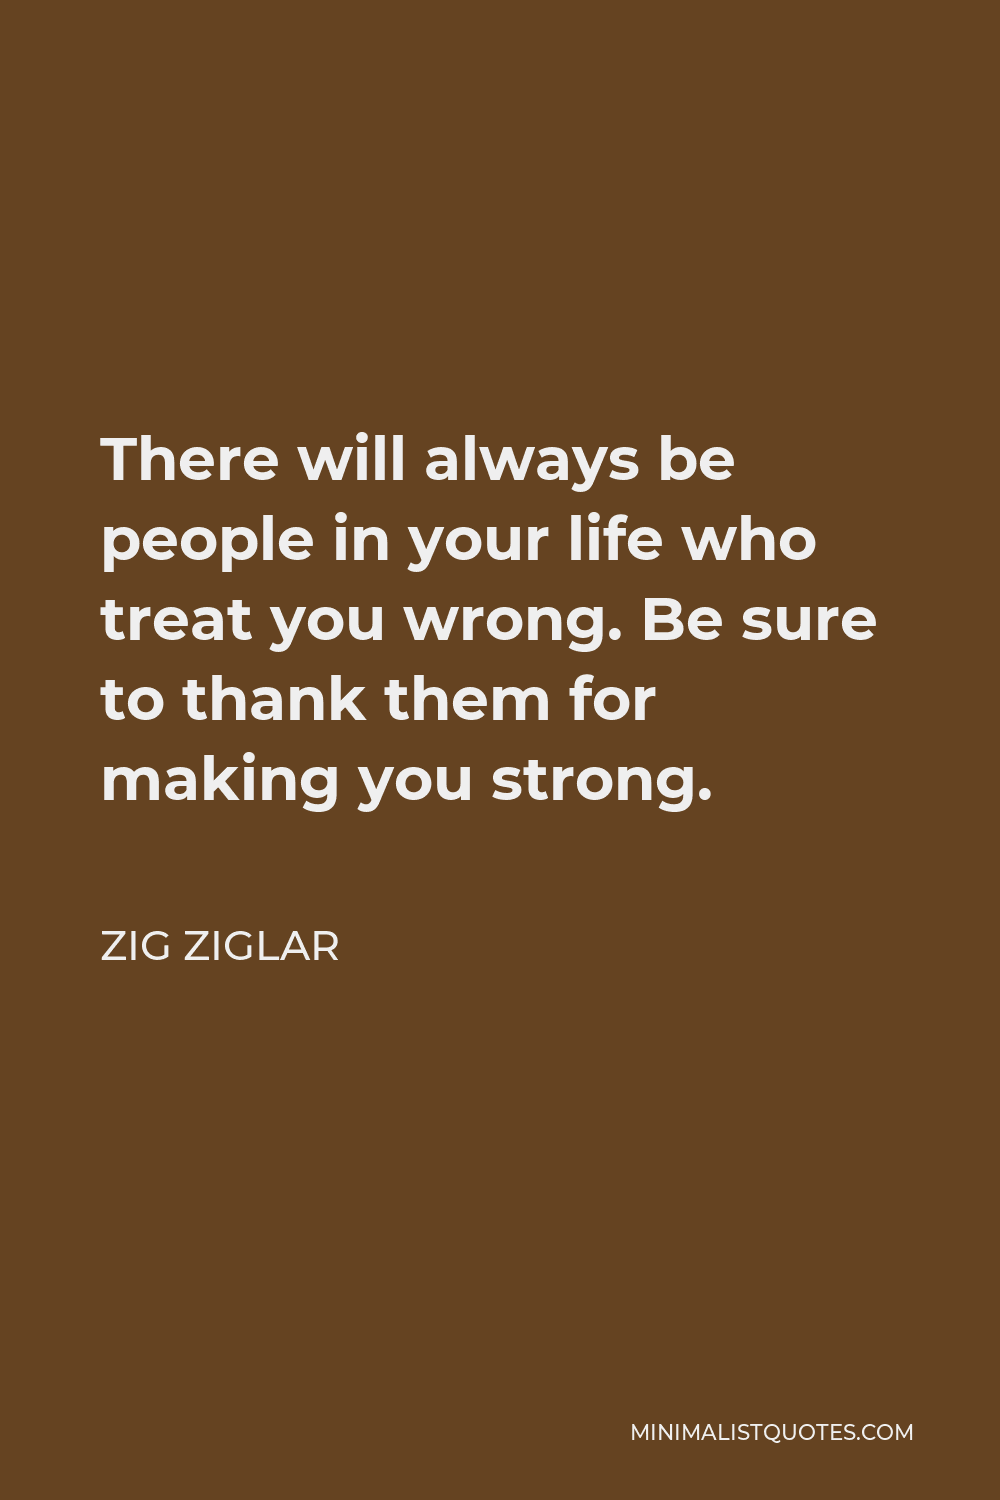 Zig Ziglar Quote: There will always be people in your life who treat ...